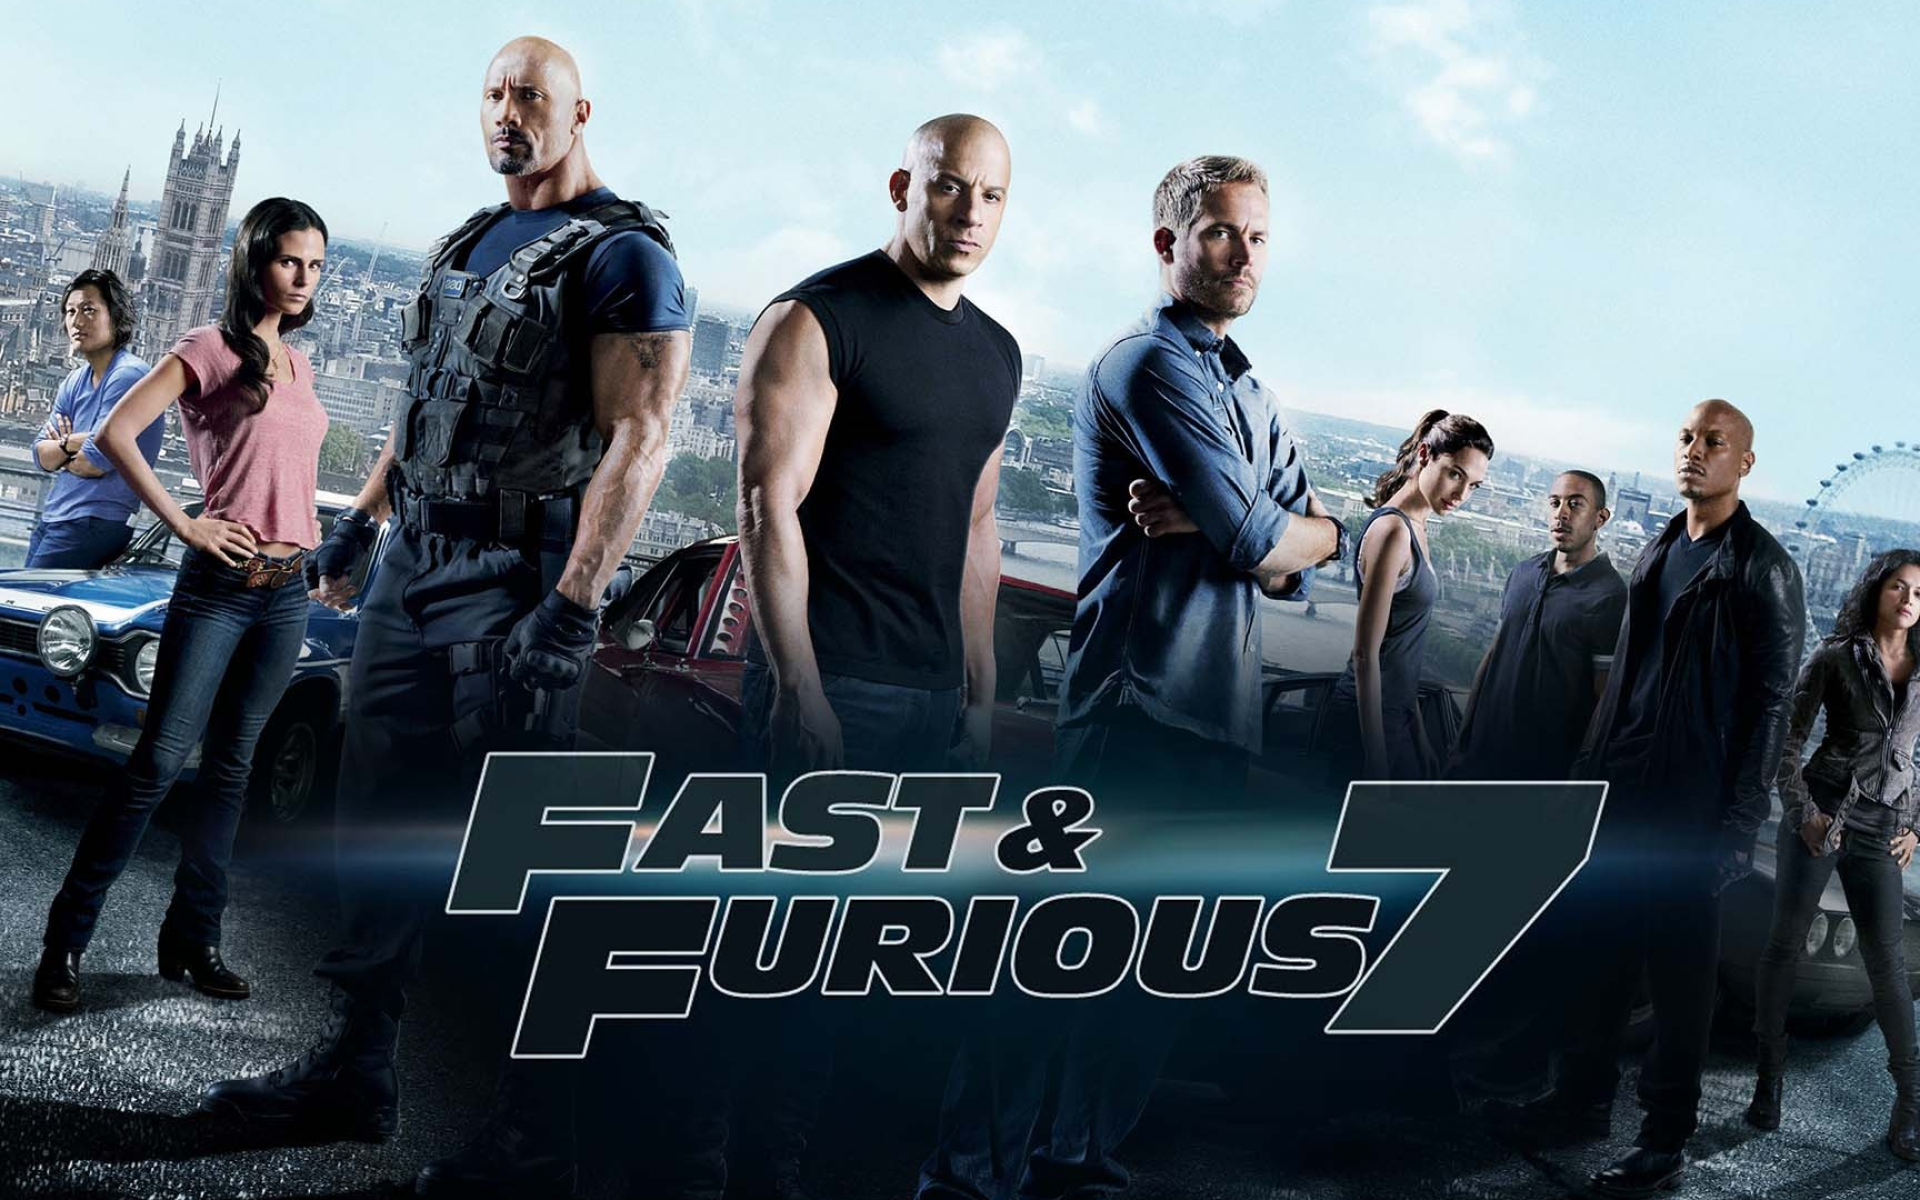 Furious 7, Fast and furious cars, High-quality wallpapers, Speed and excitement, 1920x1200 HD Desktop